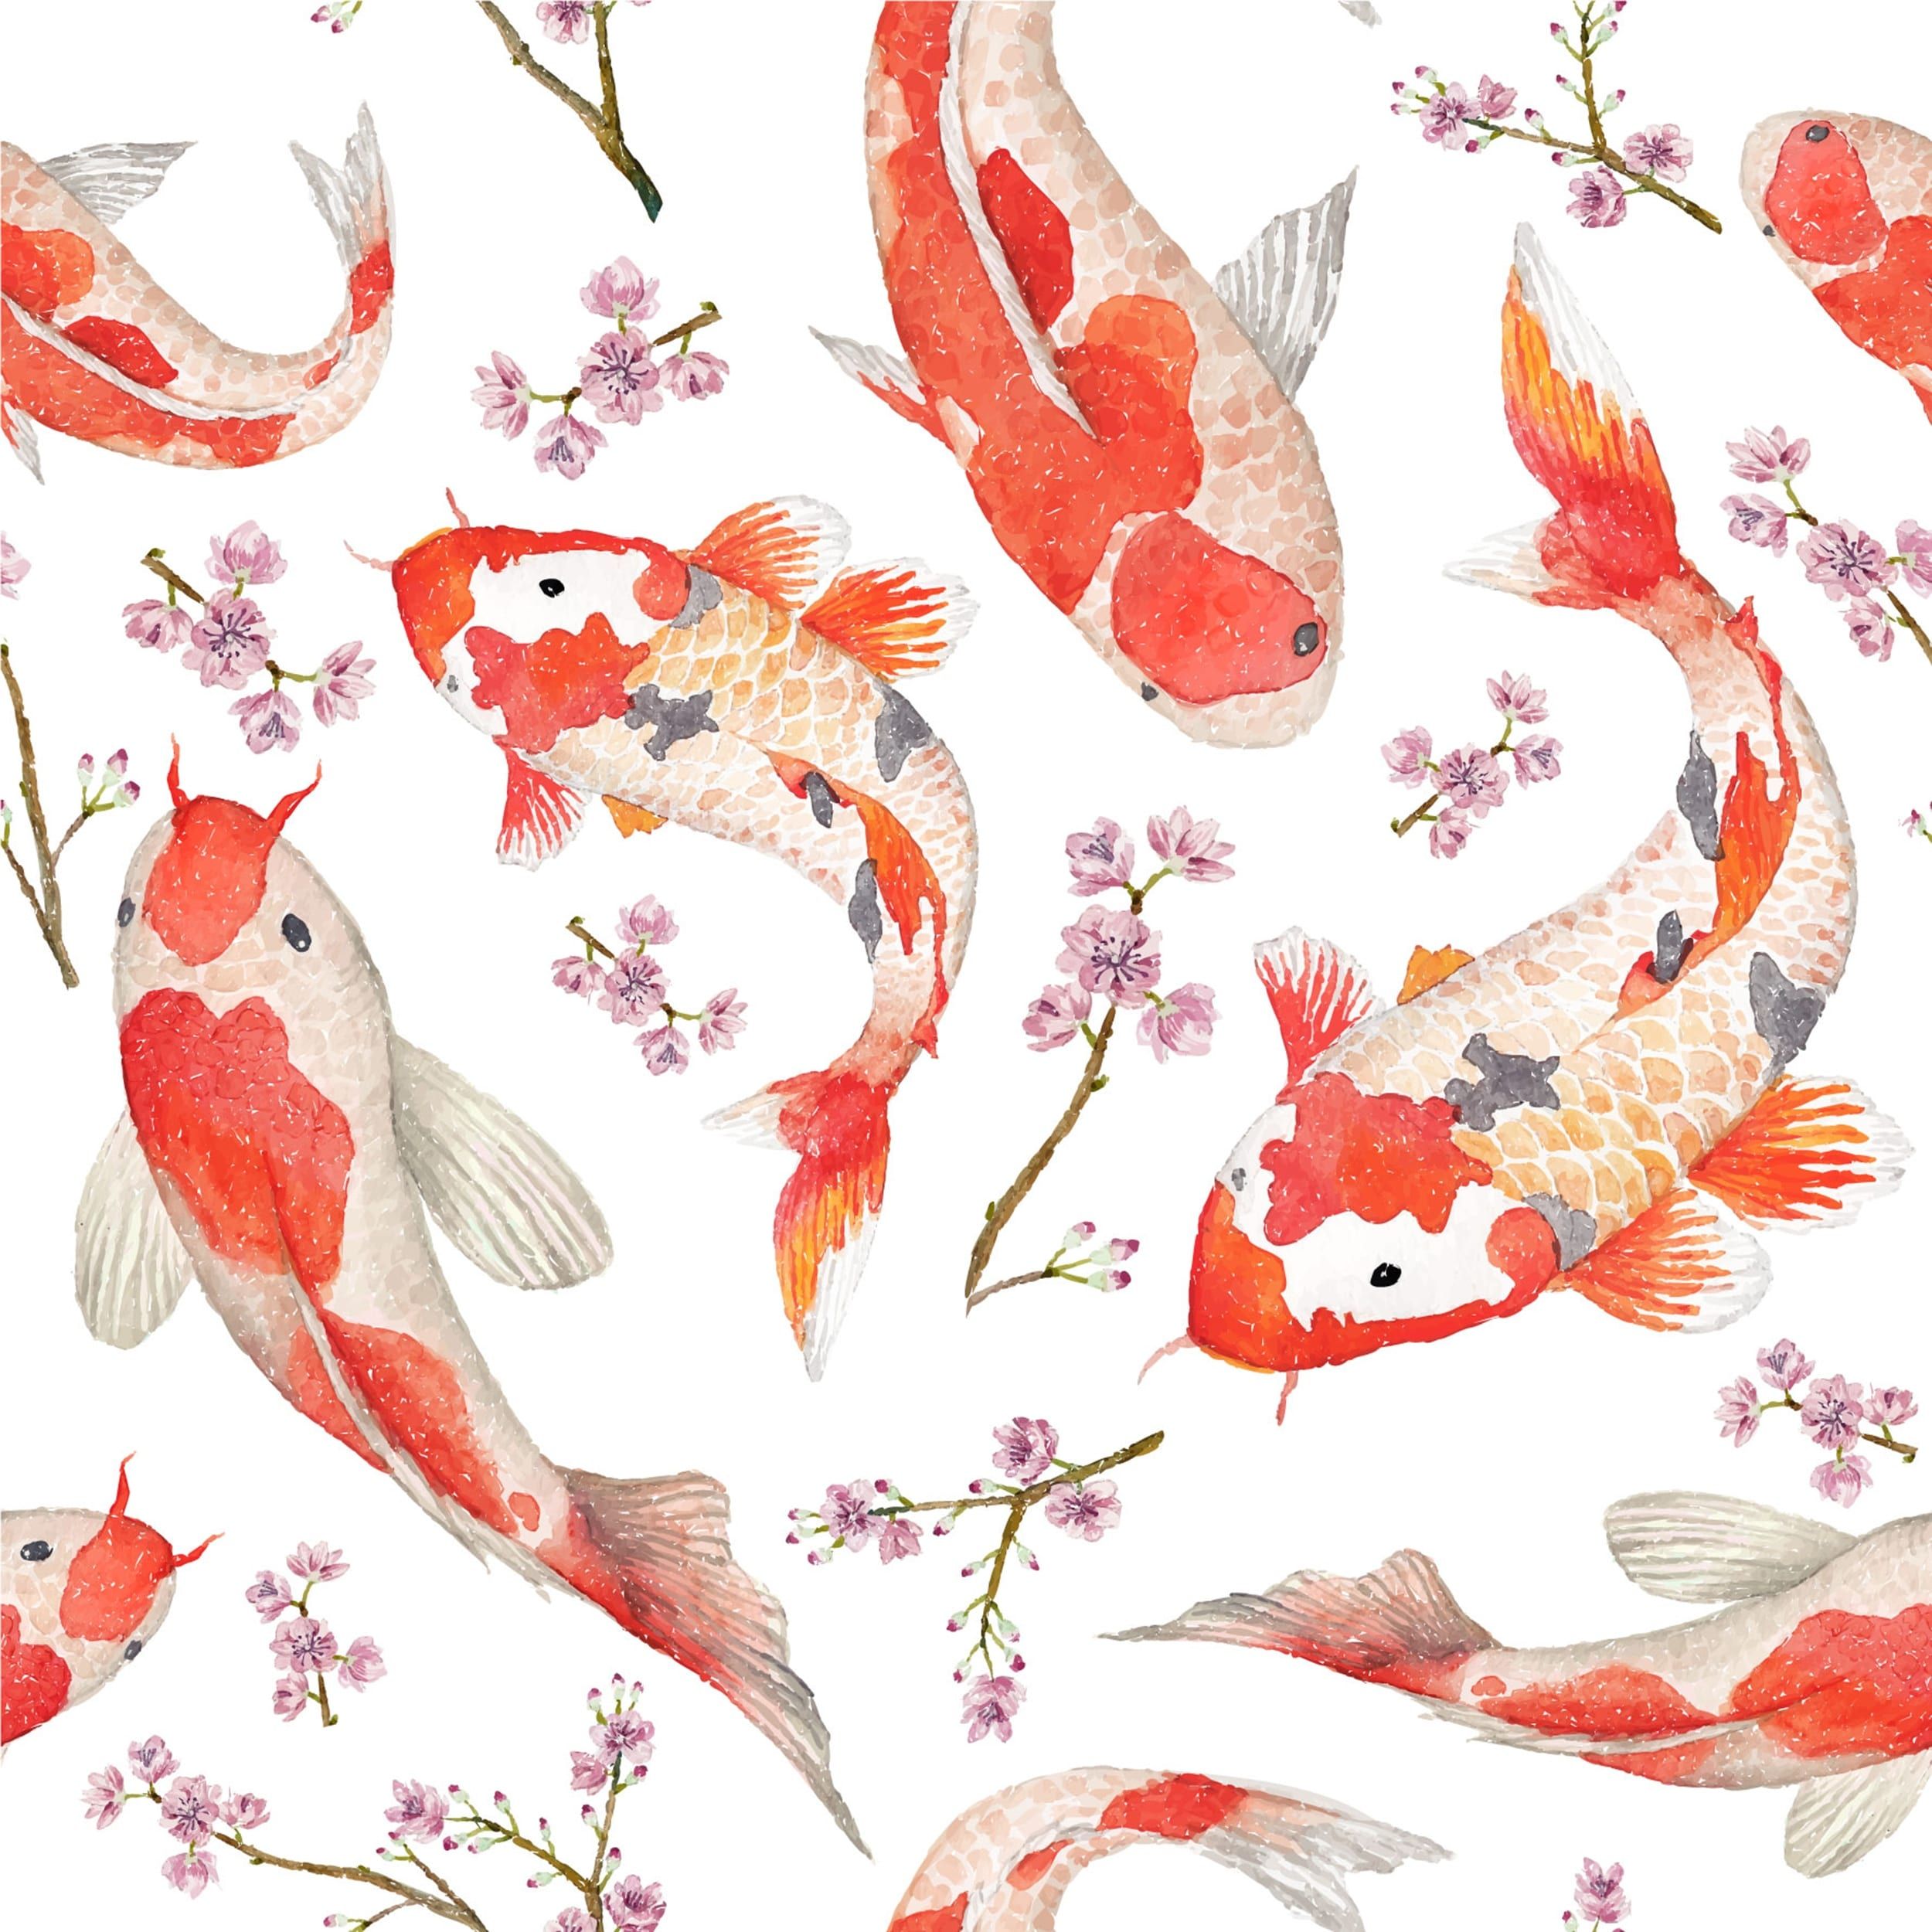 A watercolor painting of orange and white koi fish swimming among pink cherry blossoms - Koi fish